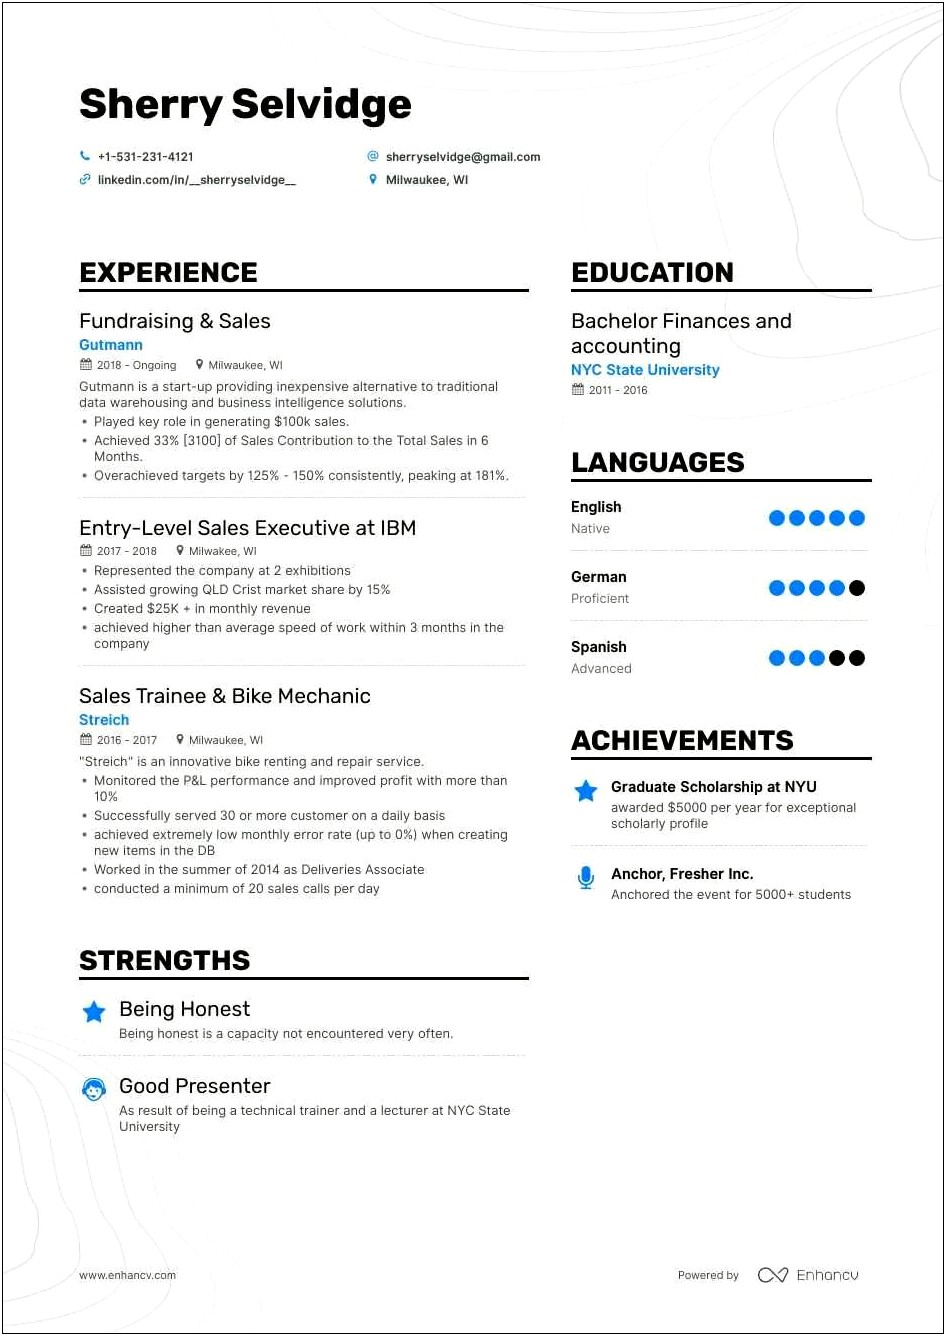 Resume Objective Examples For Entry Level Sales